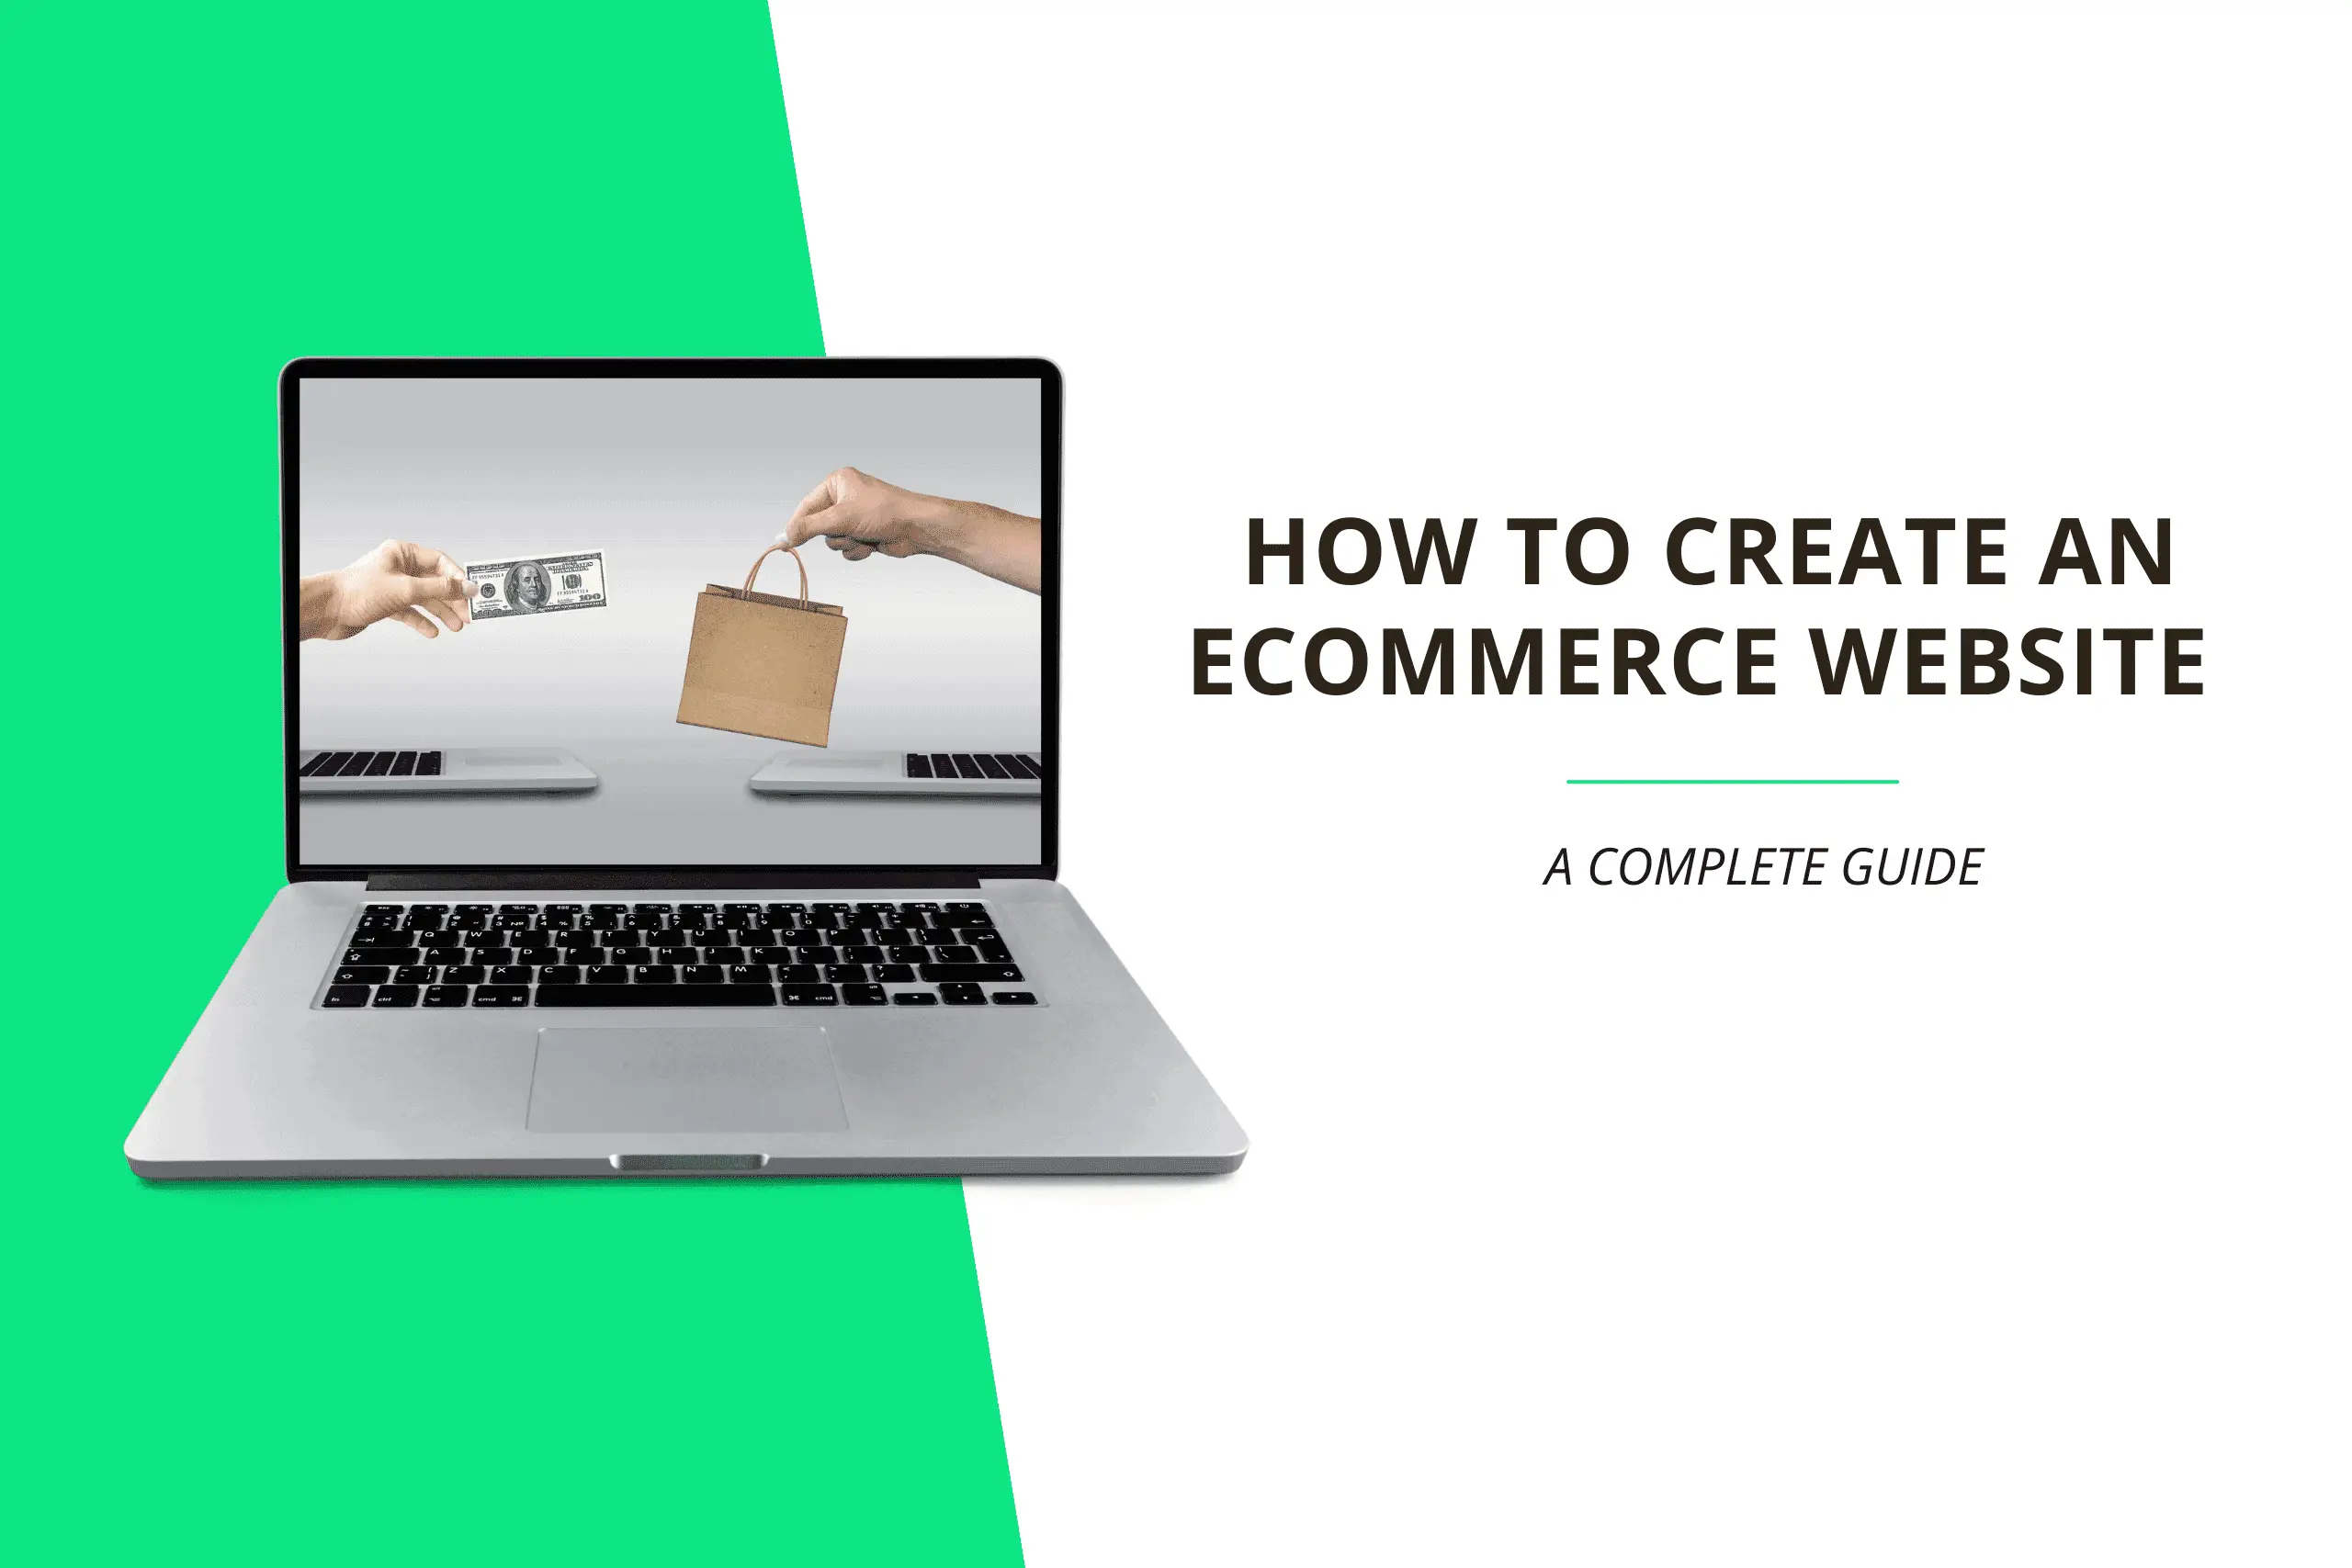 How to Create an Ecommerce Website With WordPress